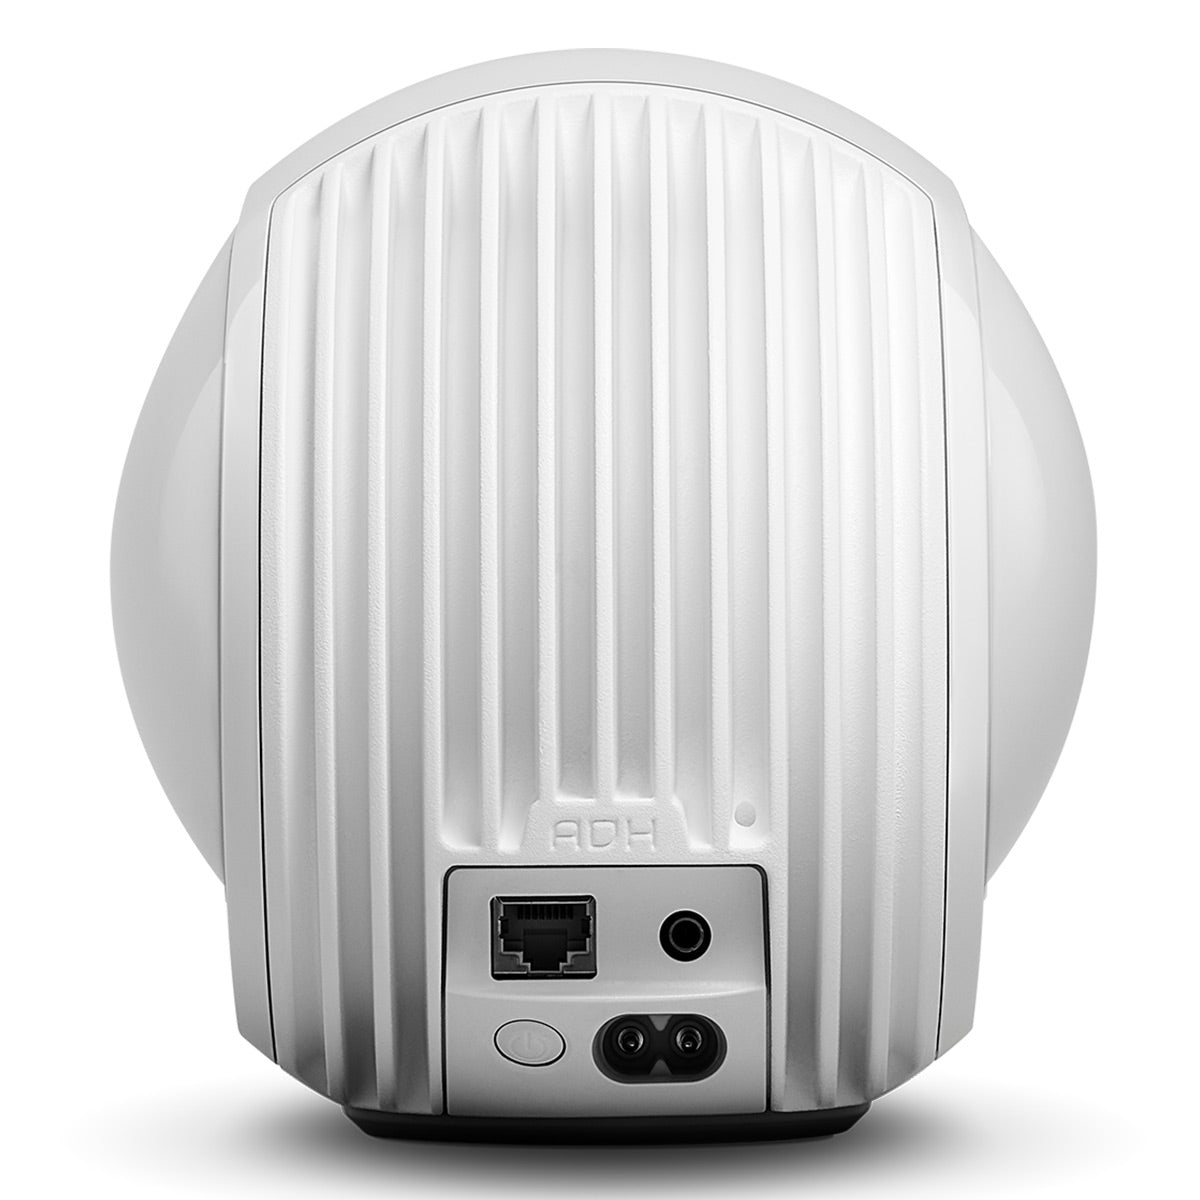 Devialet Phantom II 98db Wireless Compact Speaker (Iconic White) with Remote (Matte White)